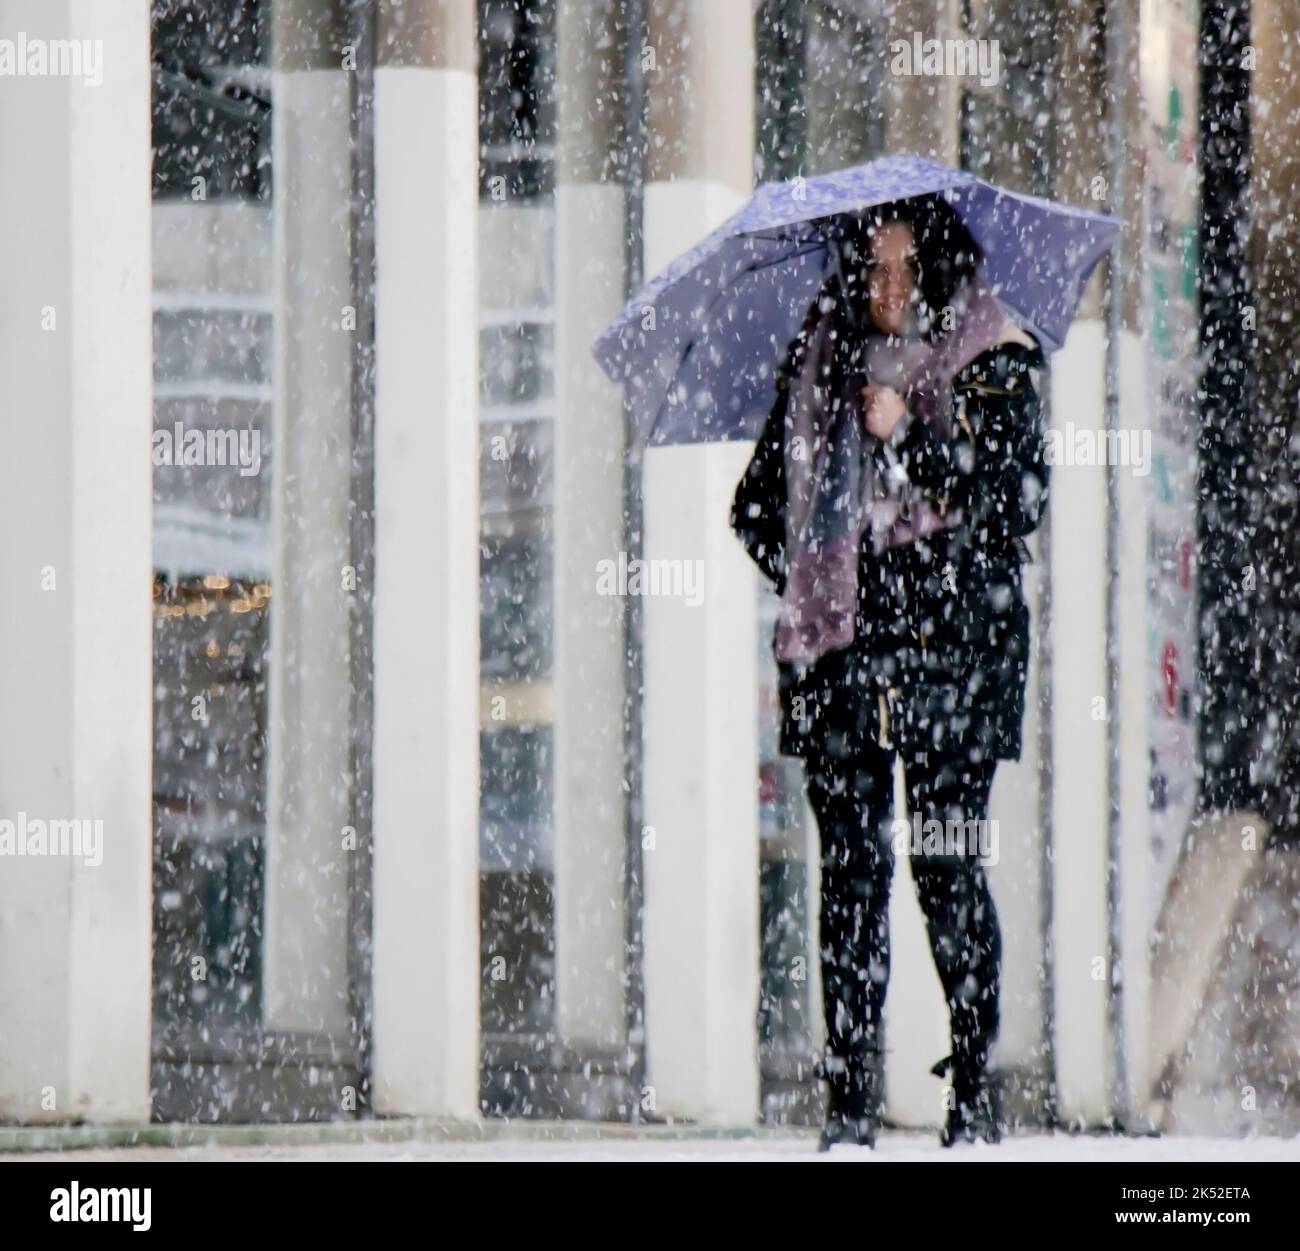 Belgrade, Serbia - December 15, 2018: One young woman under purple umbrella  walking city street on a snowy day Stock Photo